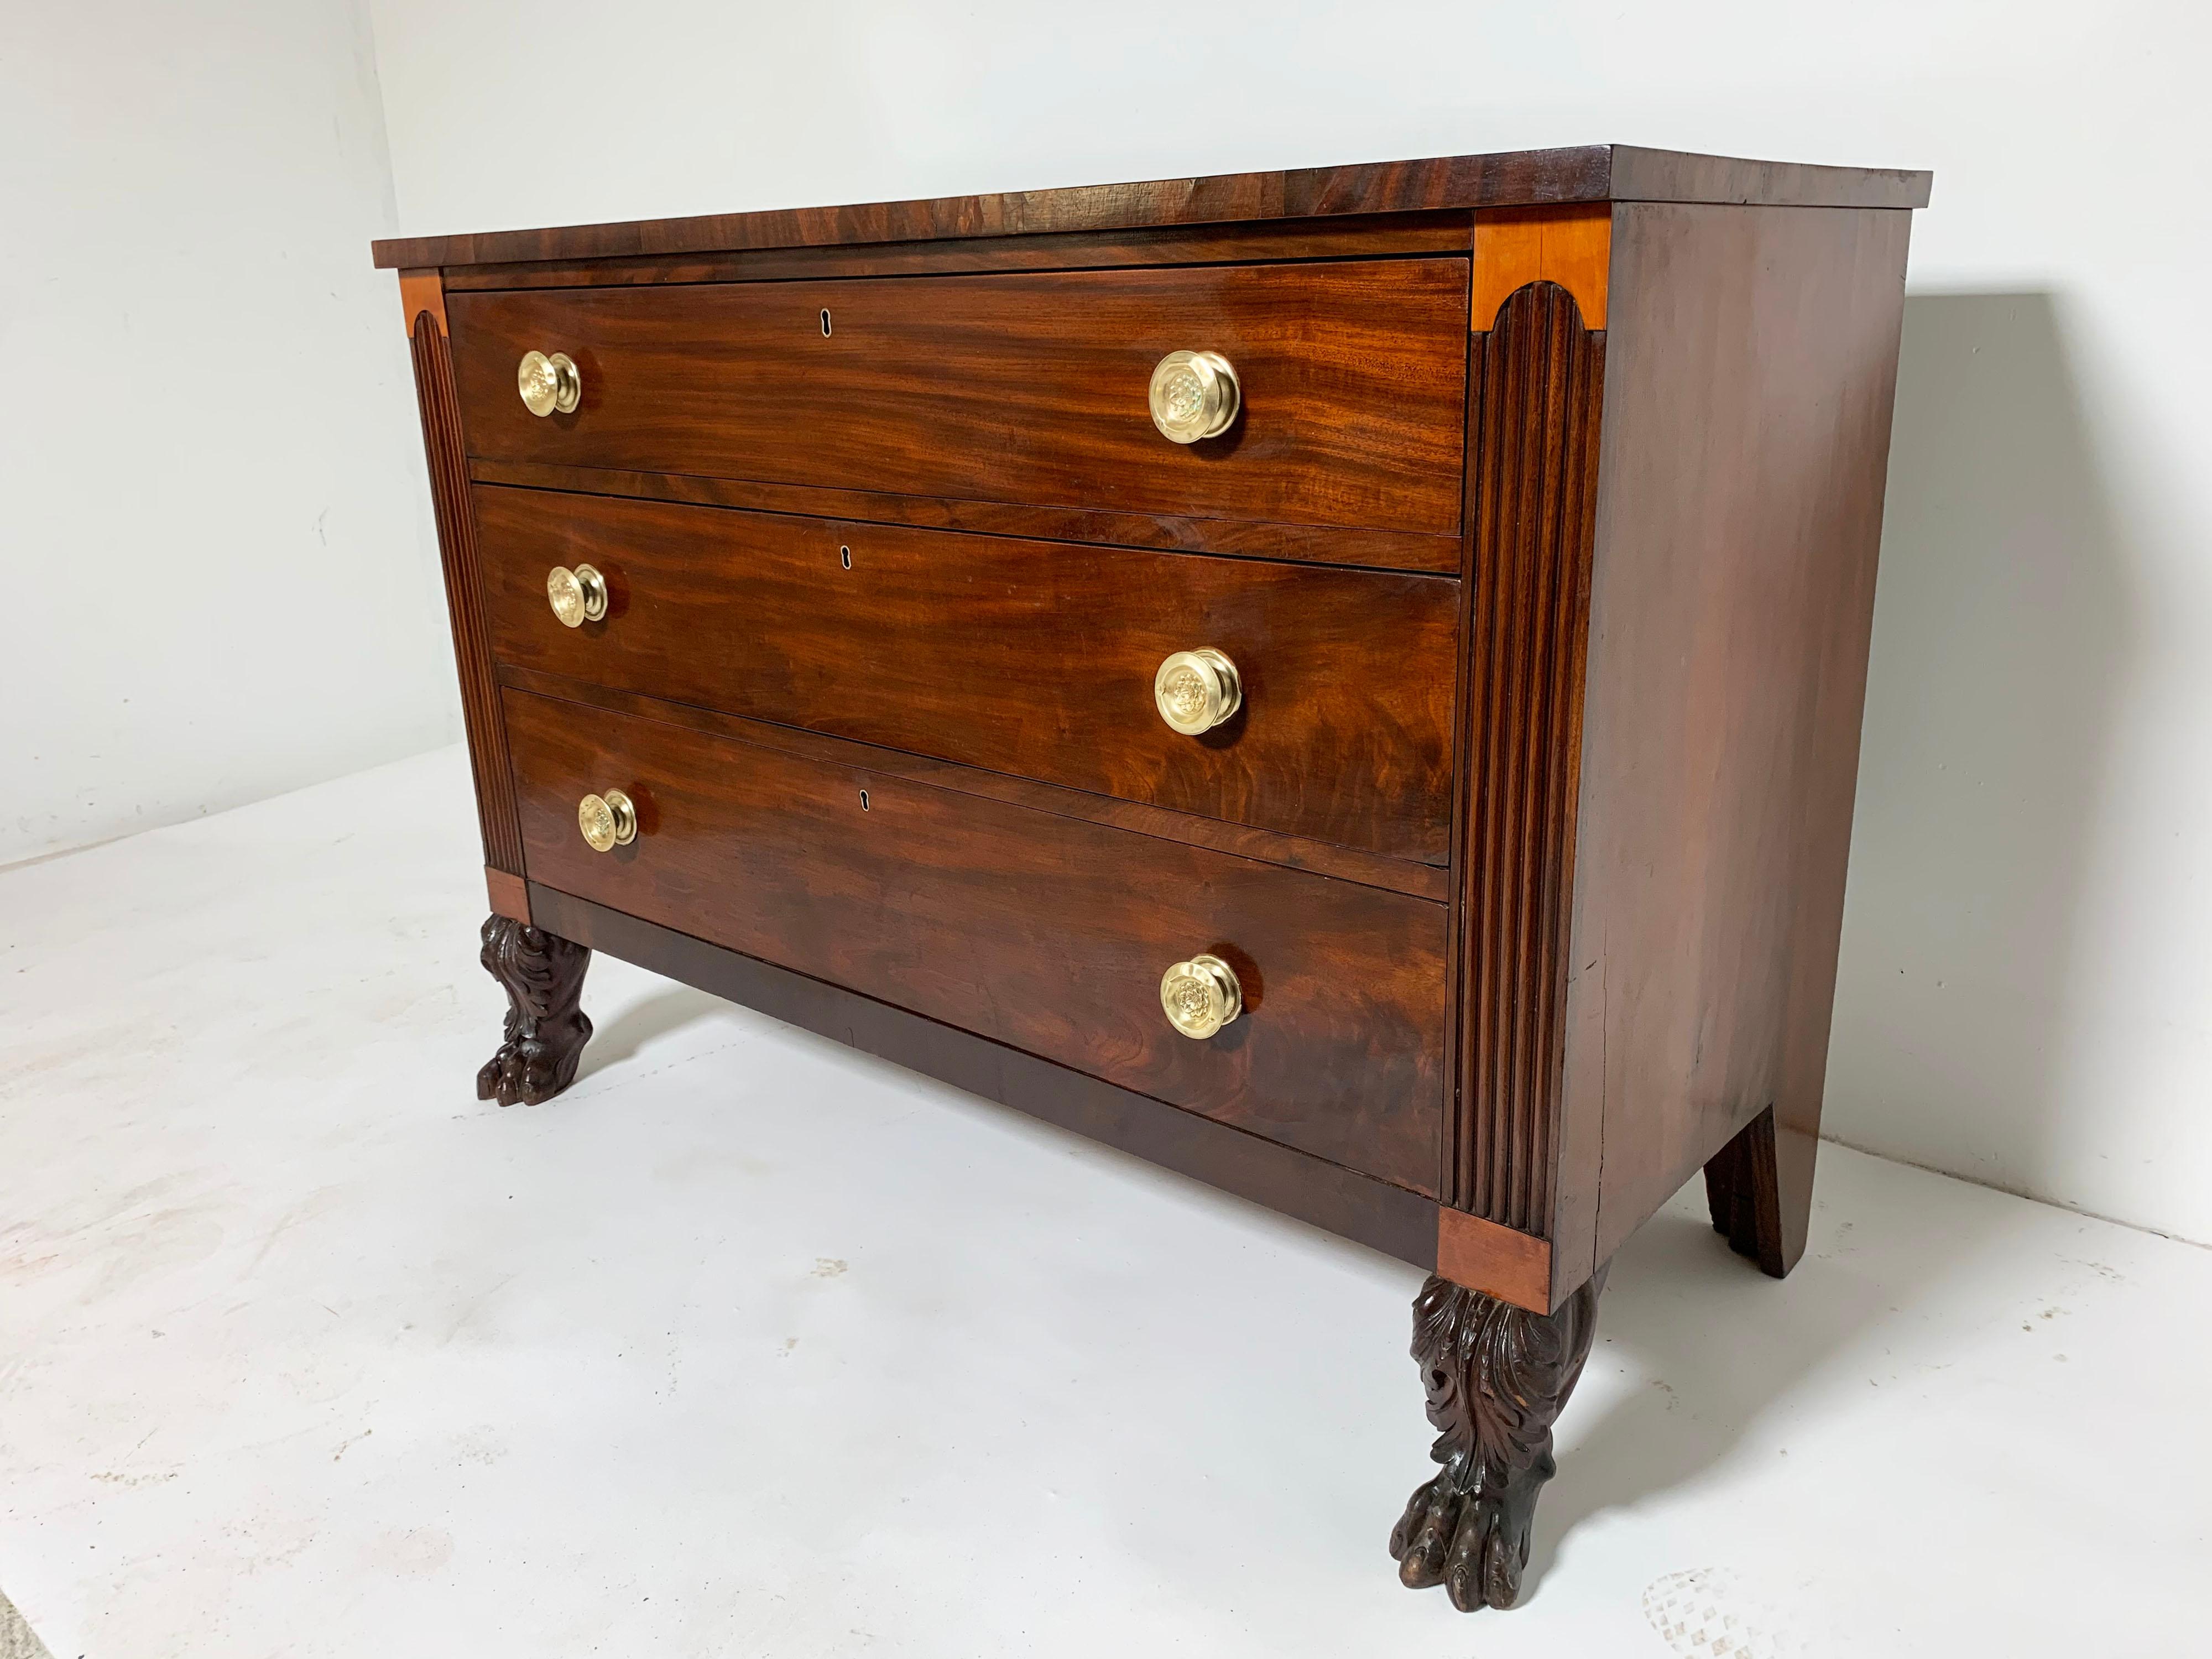 A Federal era three drawer chest in mahogany with hairy paw feet and spun brass pulls. The lighter maple patches above and below the reeded side panels arem a recognized feature of cabinet makers from the coastal Newport region.